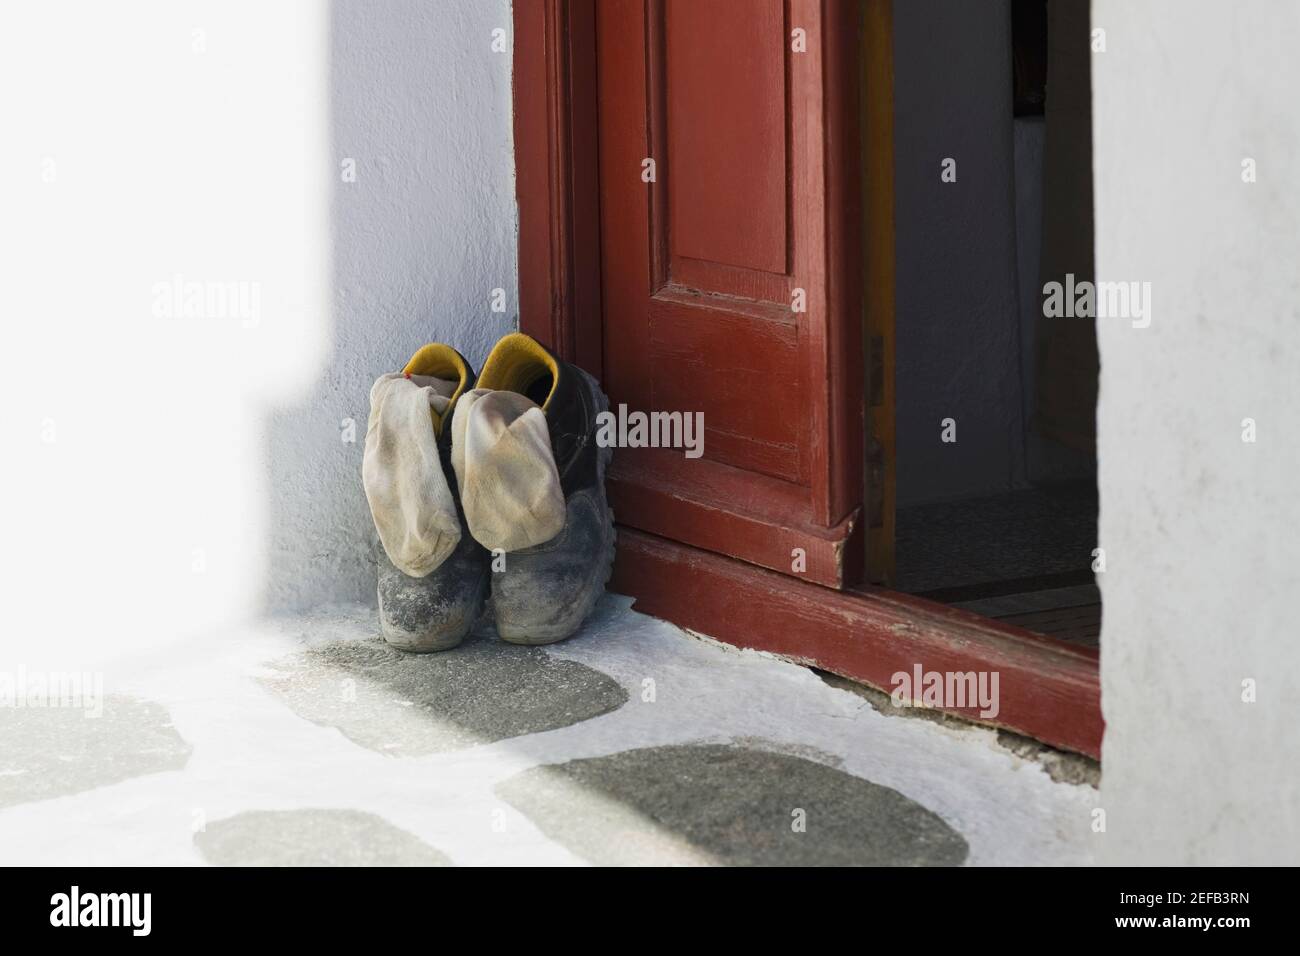 Pair of shoes at a door, Mykonos, Cyclades Islands, Greece Stock Photo